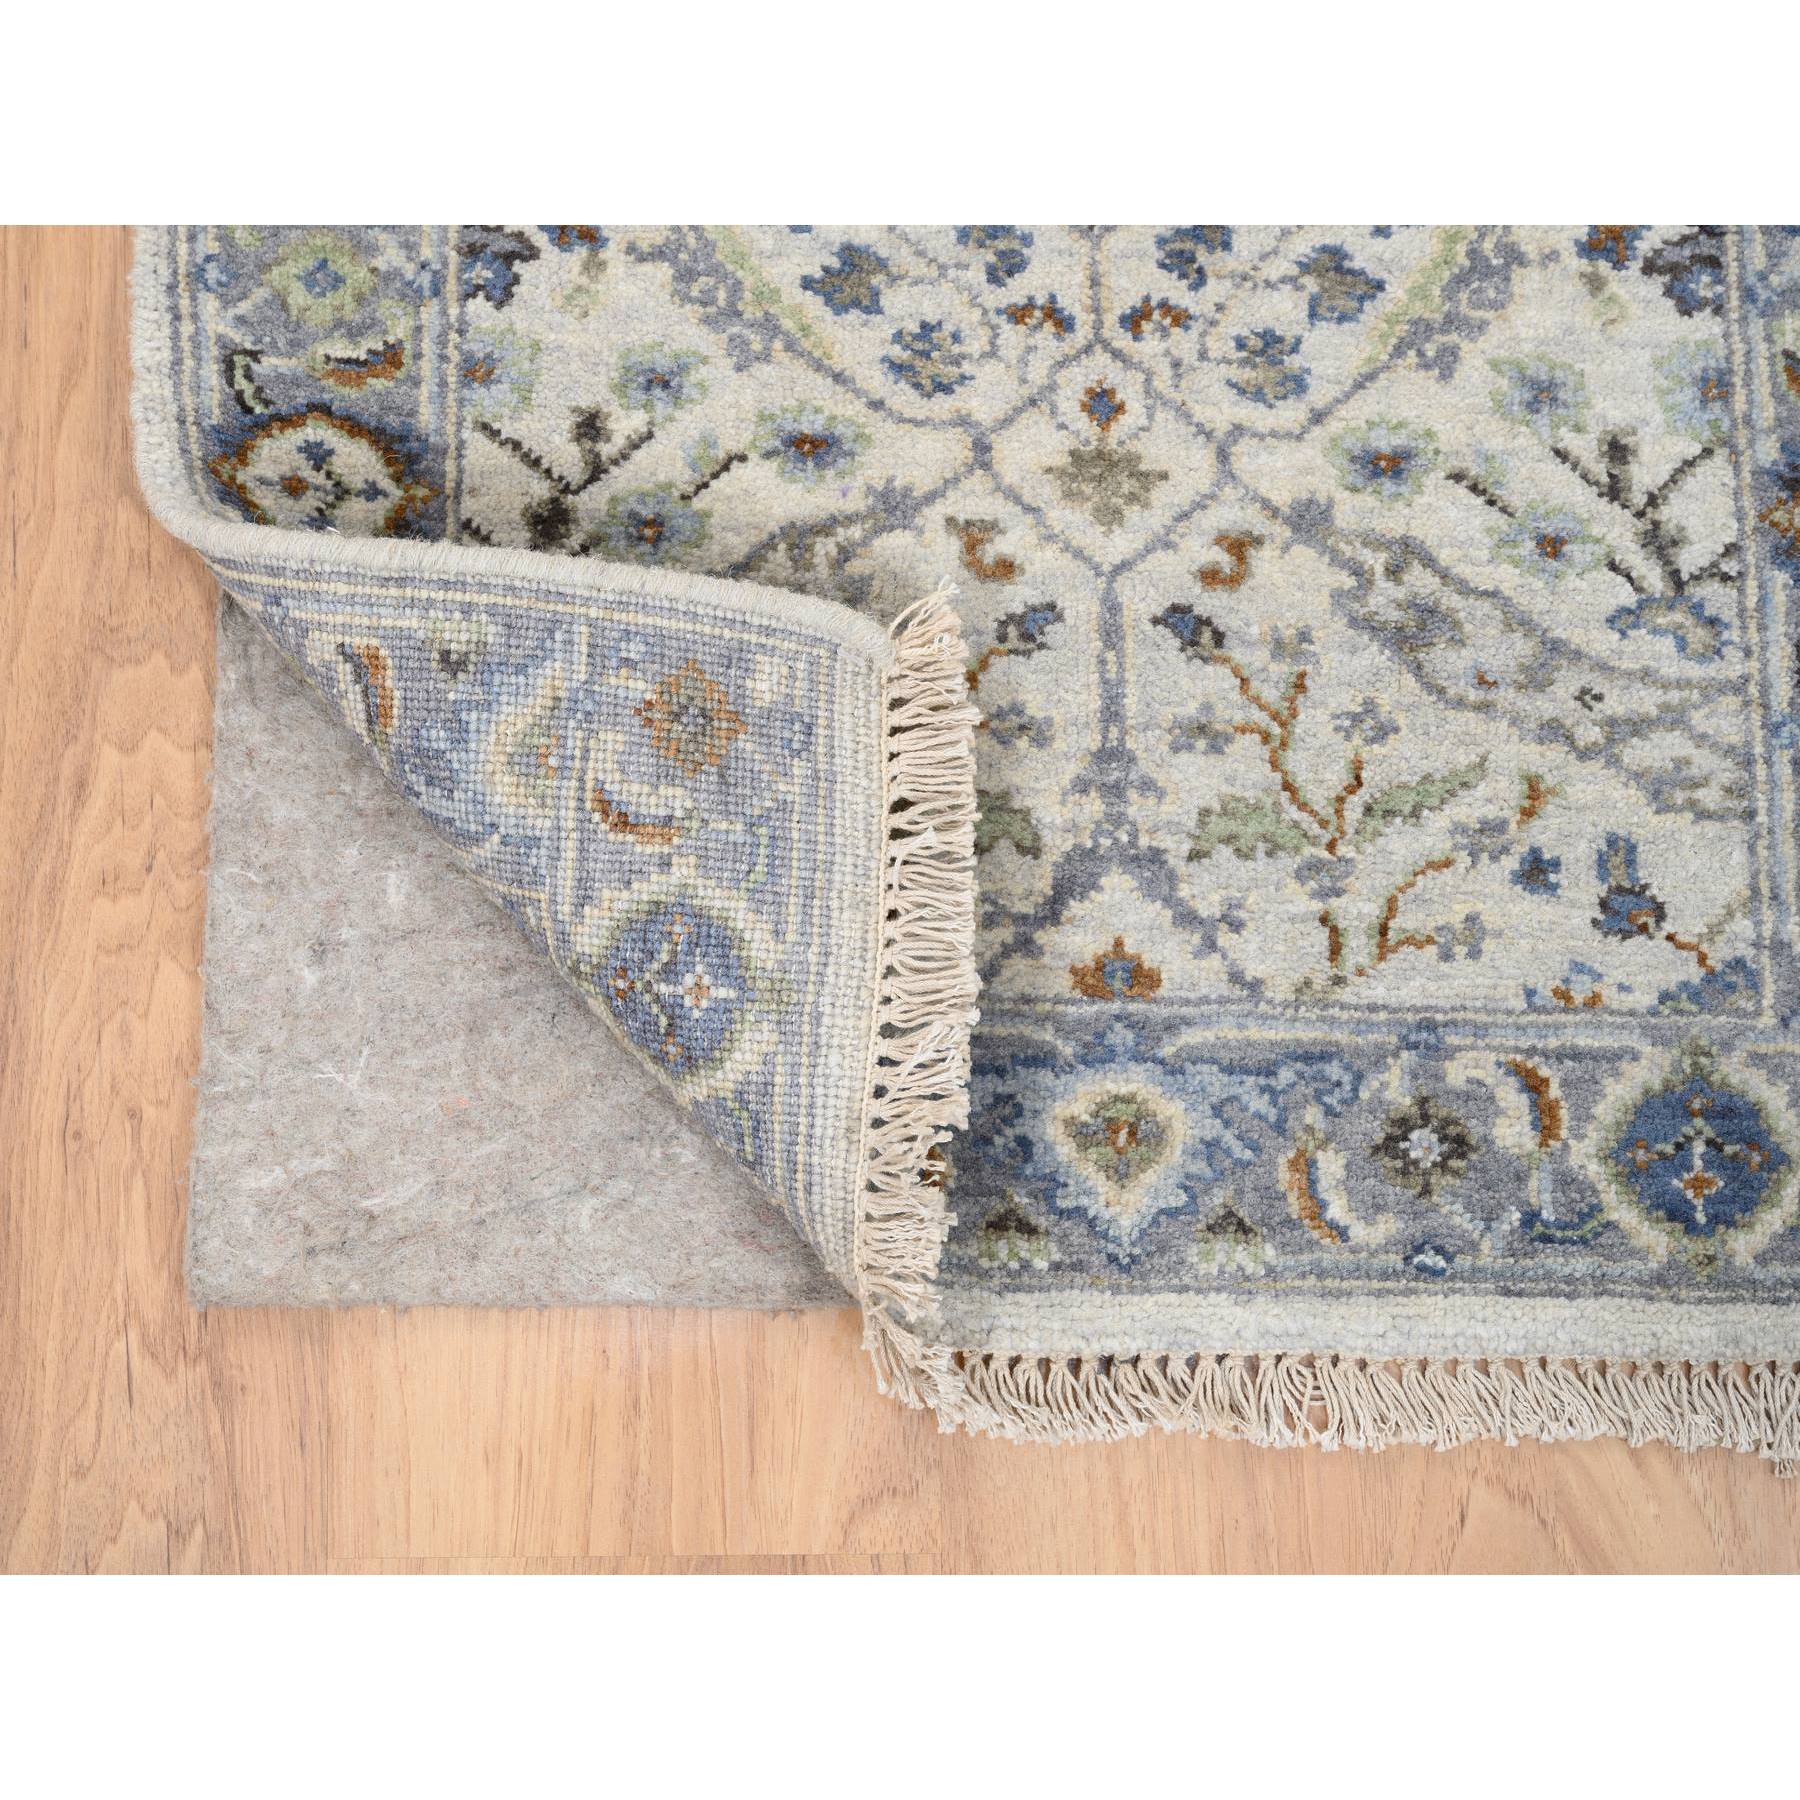 2'1"x3' Gray Oushak with All Over Design Dense Weave Wool Hand Woven Oriental Mat Rug 